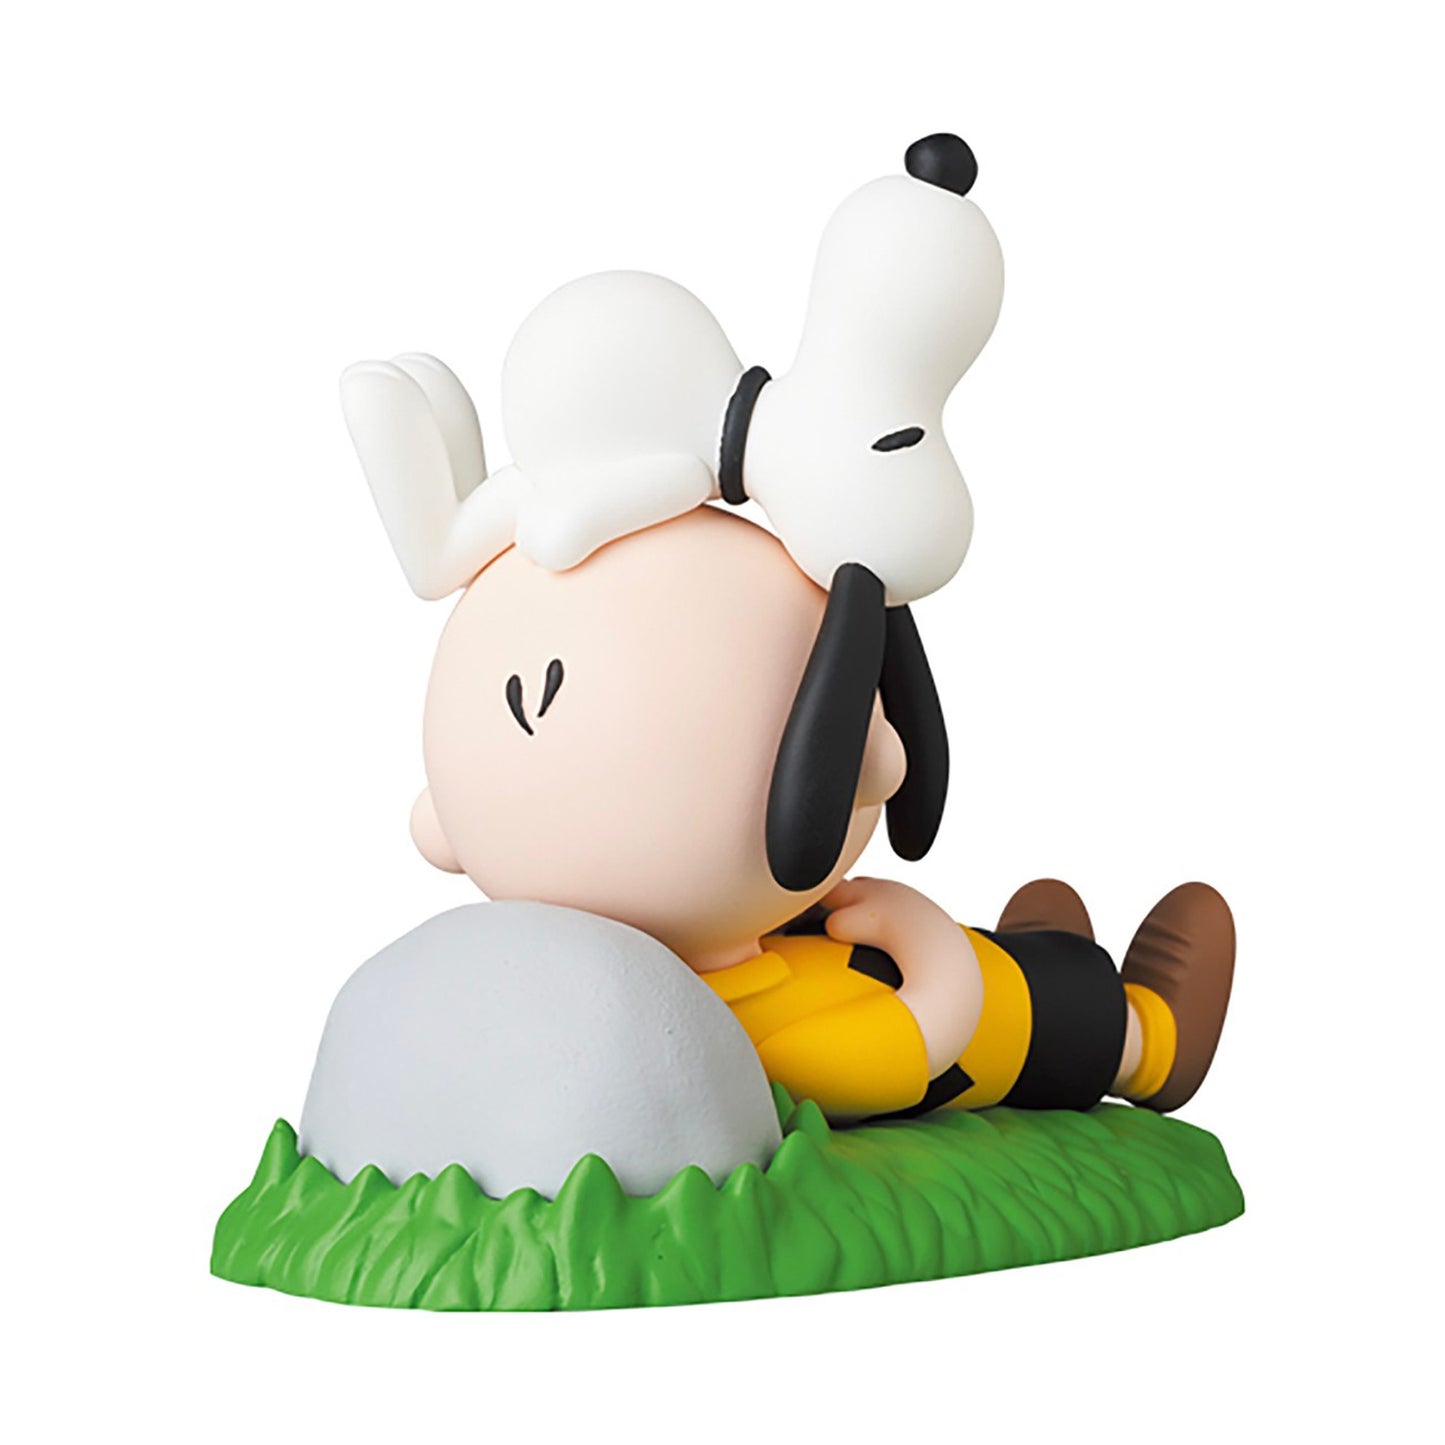 MEDICOM TOY: UDF - Peanuts Napping Charlie Brown & Snoopy Figure